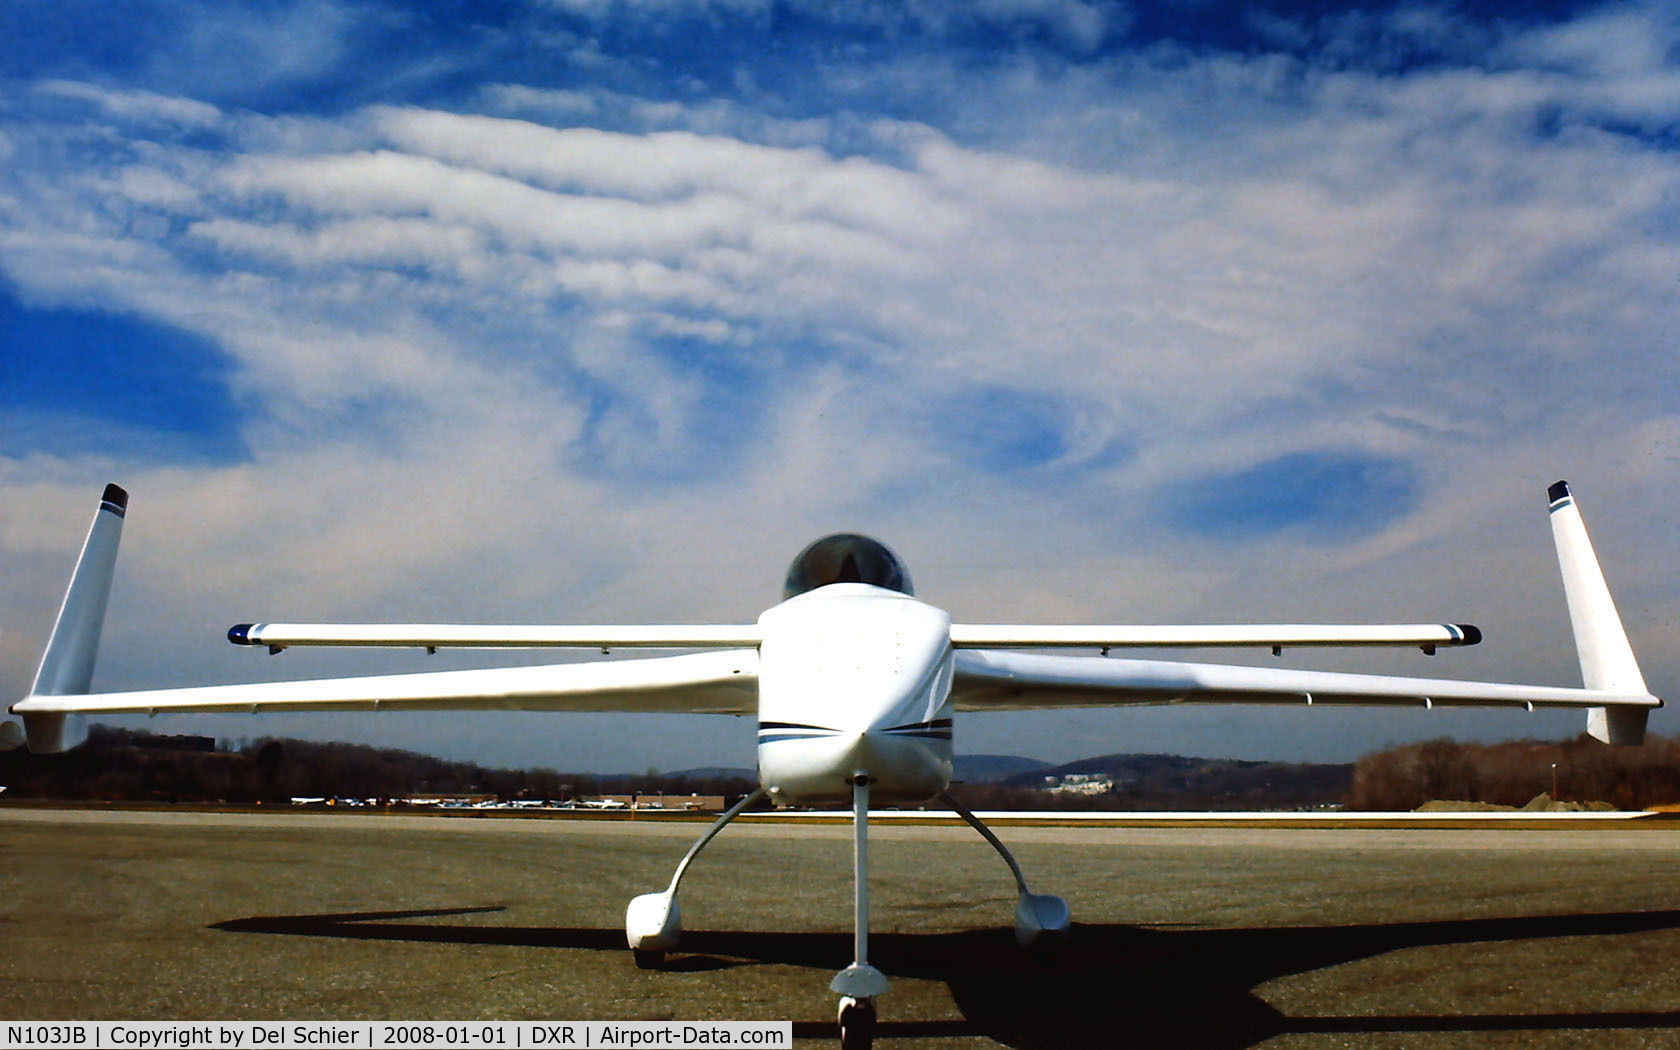 N103JB, Rutan Long-EZ C/N 509, I owned and flew this EZ for about 10 years. It was a wonderful airplane.